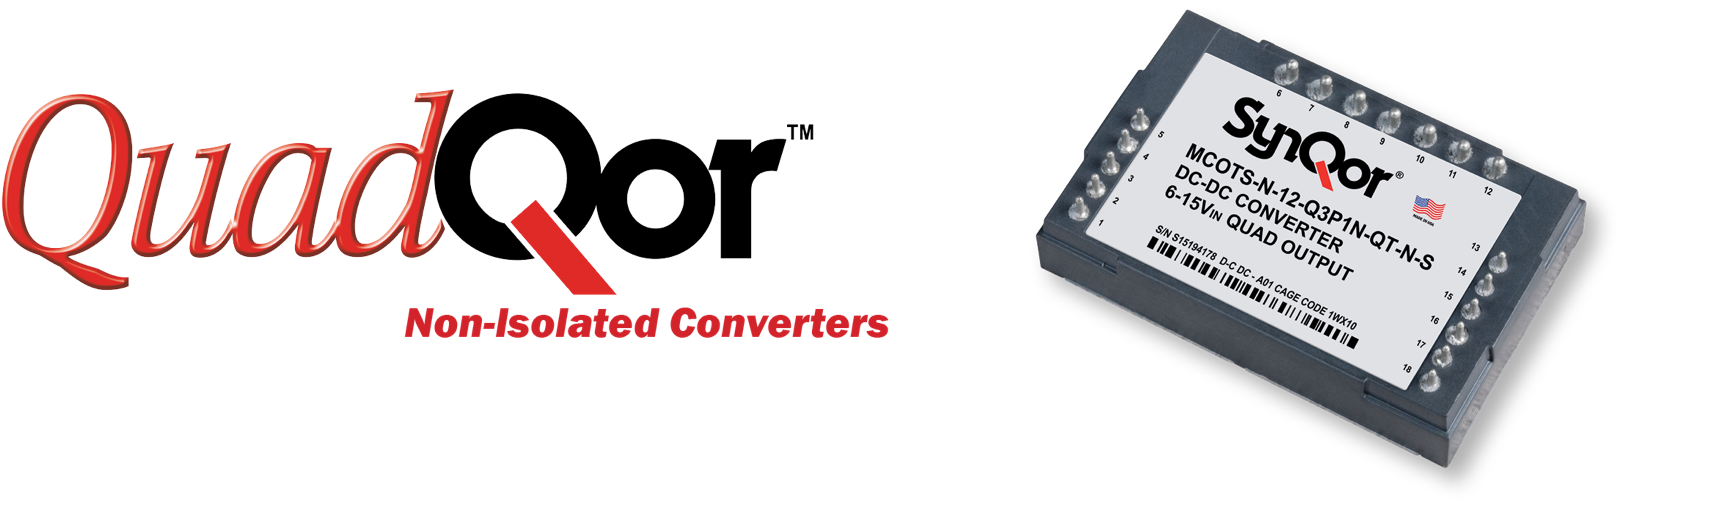 MCOTS Quad Output Non-Isolated DC-DC Converters